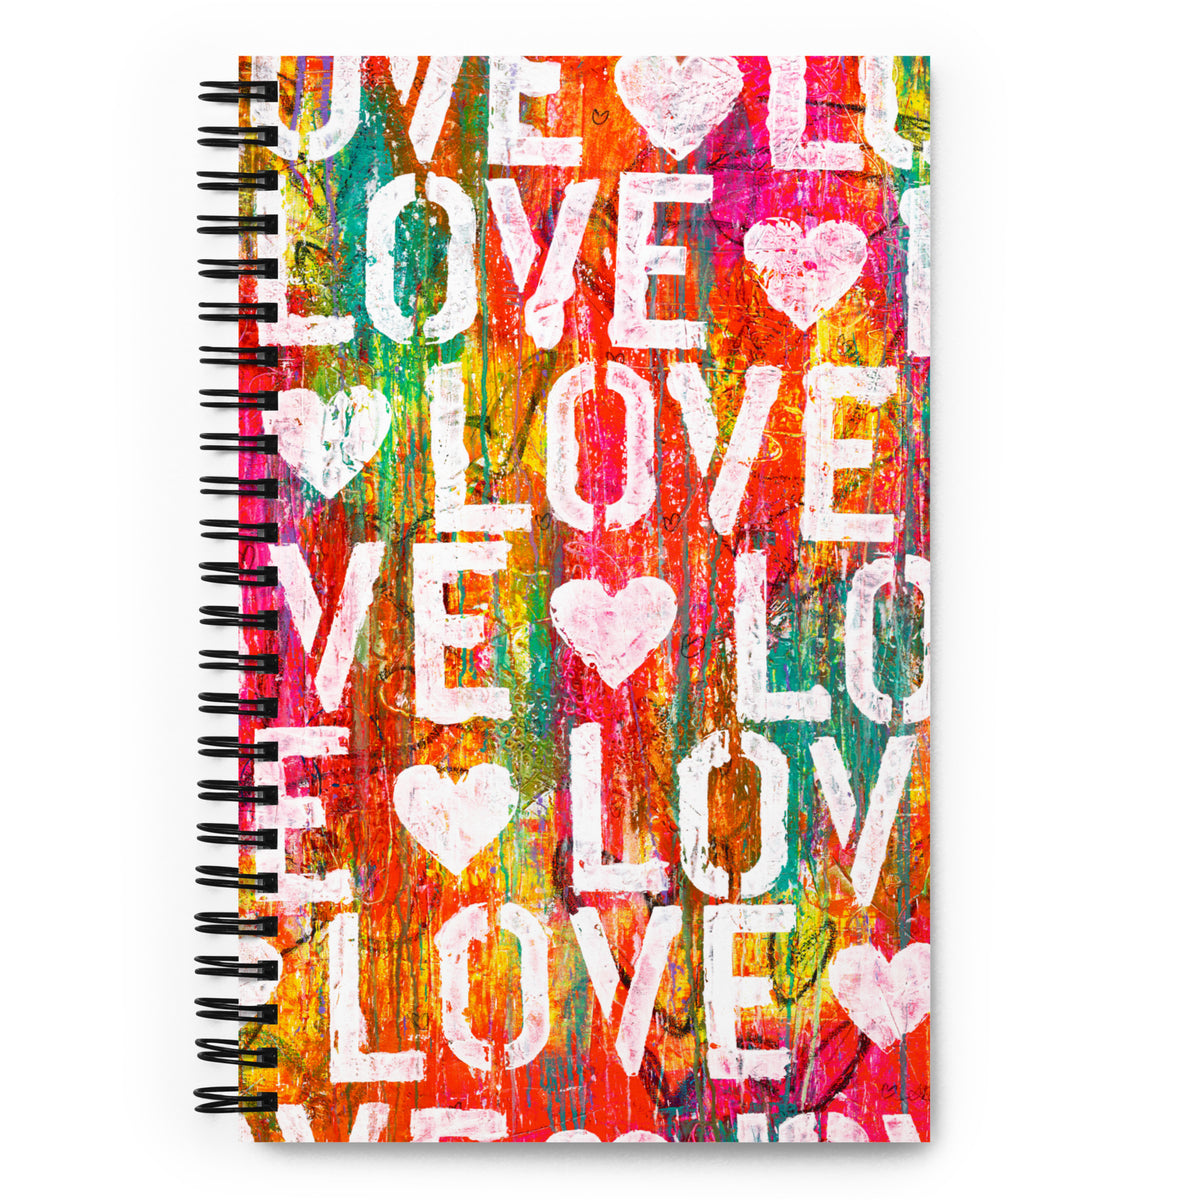 LOTS OF LOVE Spiral notebook